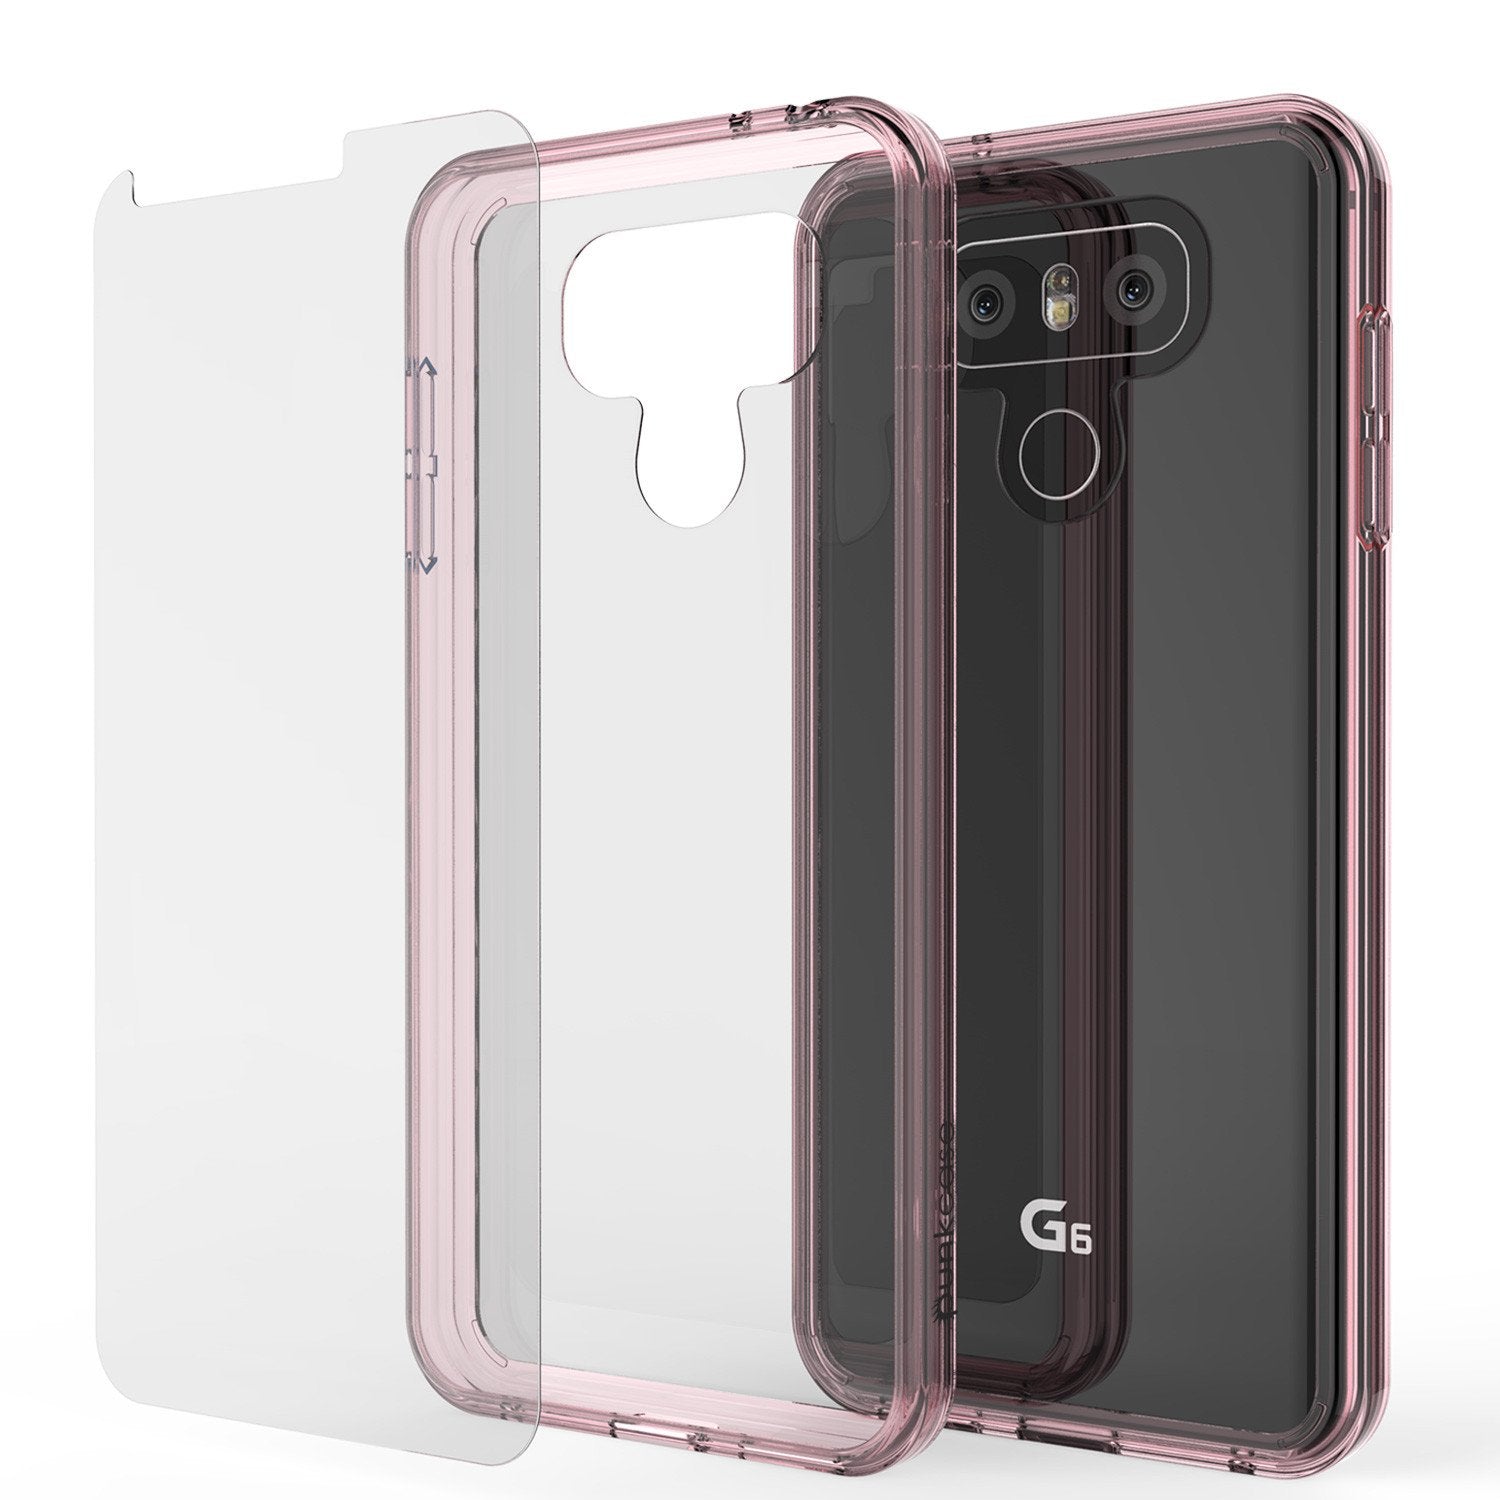 LG G6 Case Punkcase® LUCID 2.0 Crystal Pink Series w/ PUNK SHIELD Screen Protector | Ultra Fit - PunkCase NZ